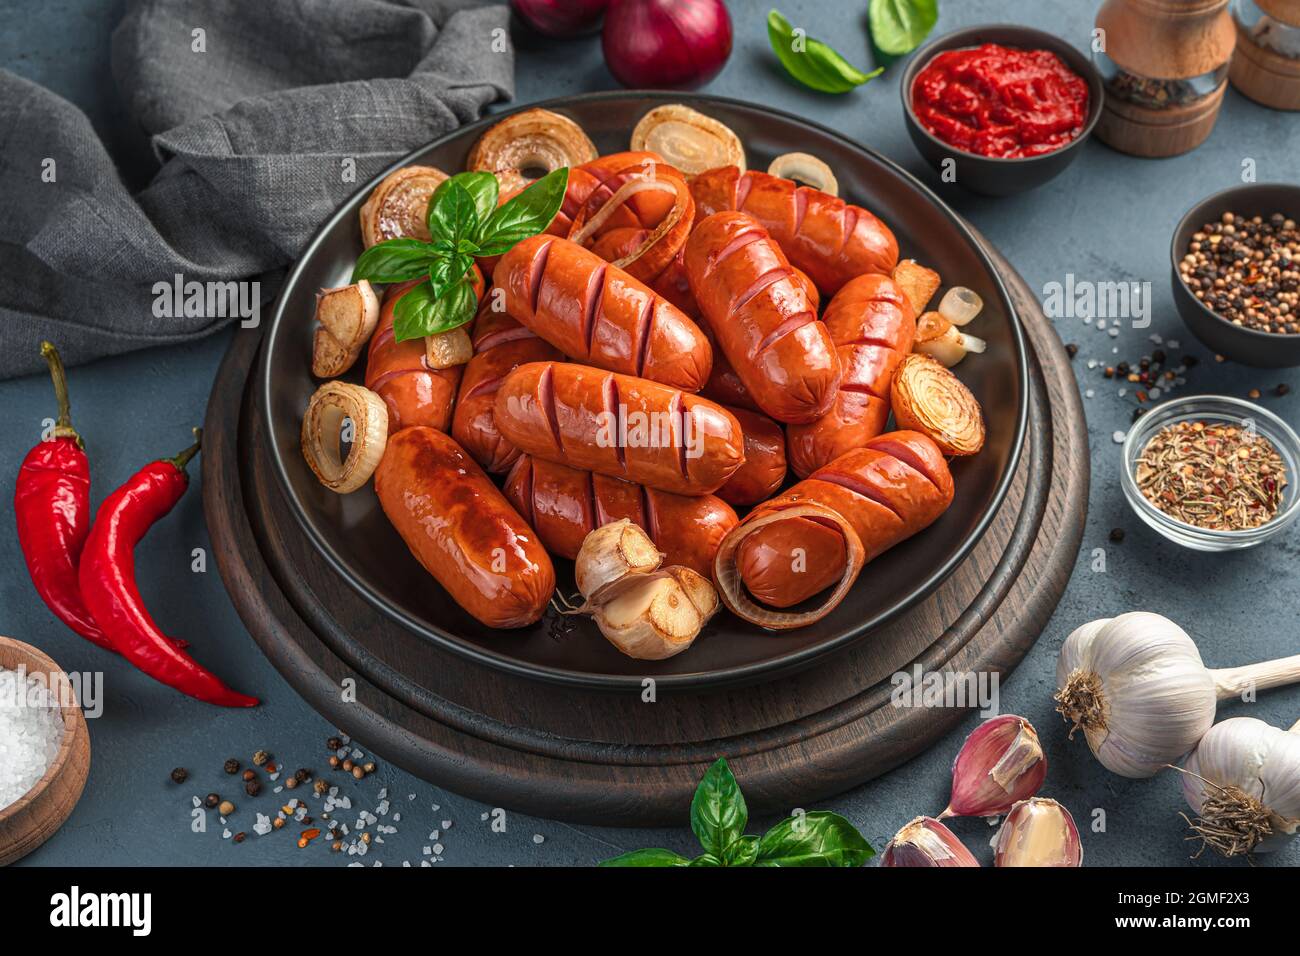 Delicious, fried sausages with onions and garlic close-up. Fast food, beer appetizer. Stock Photo